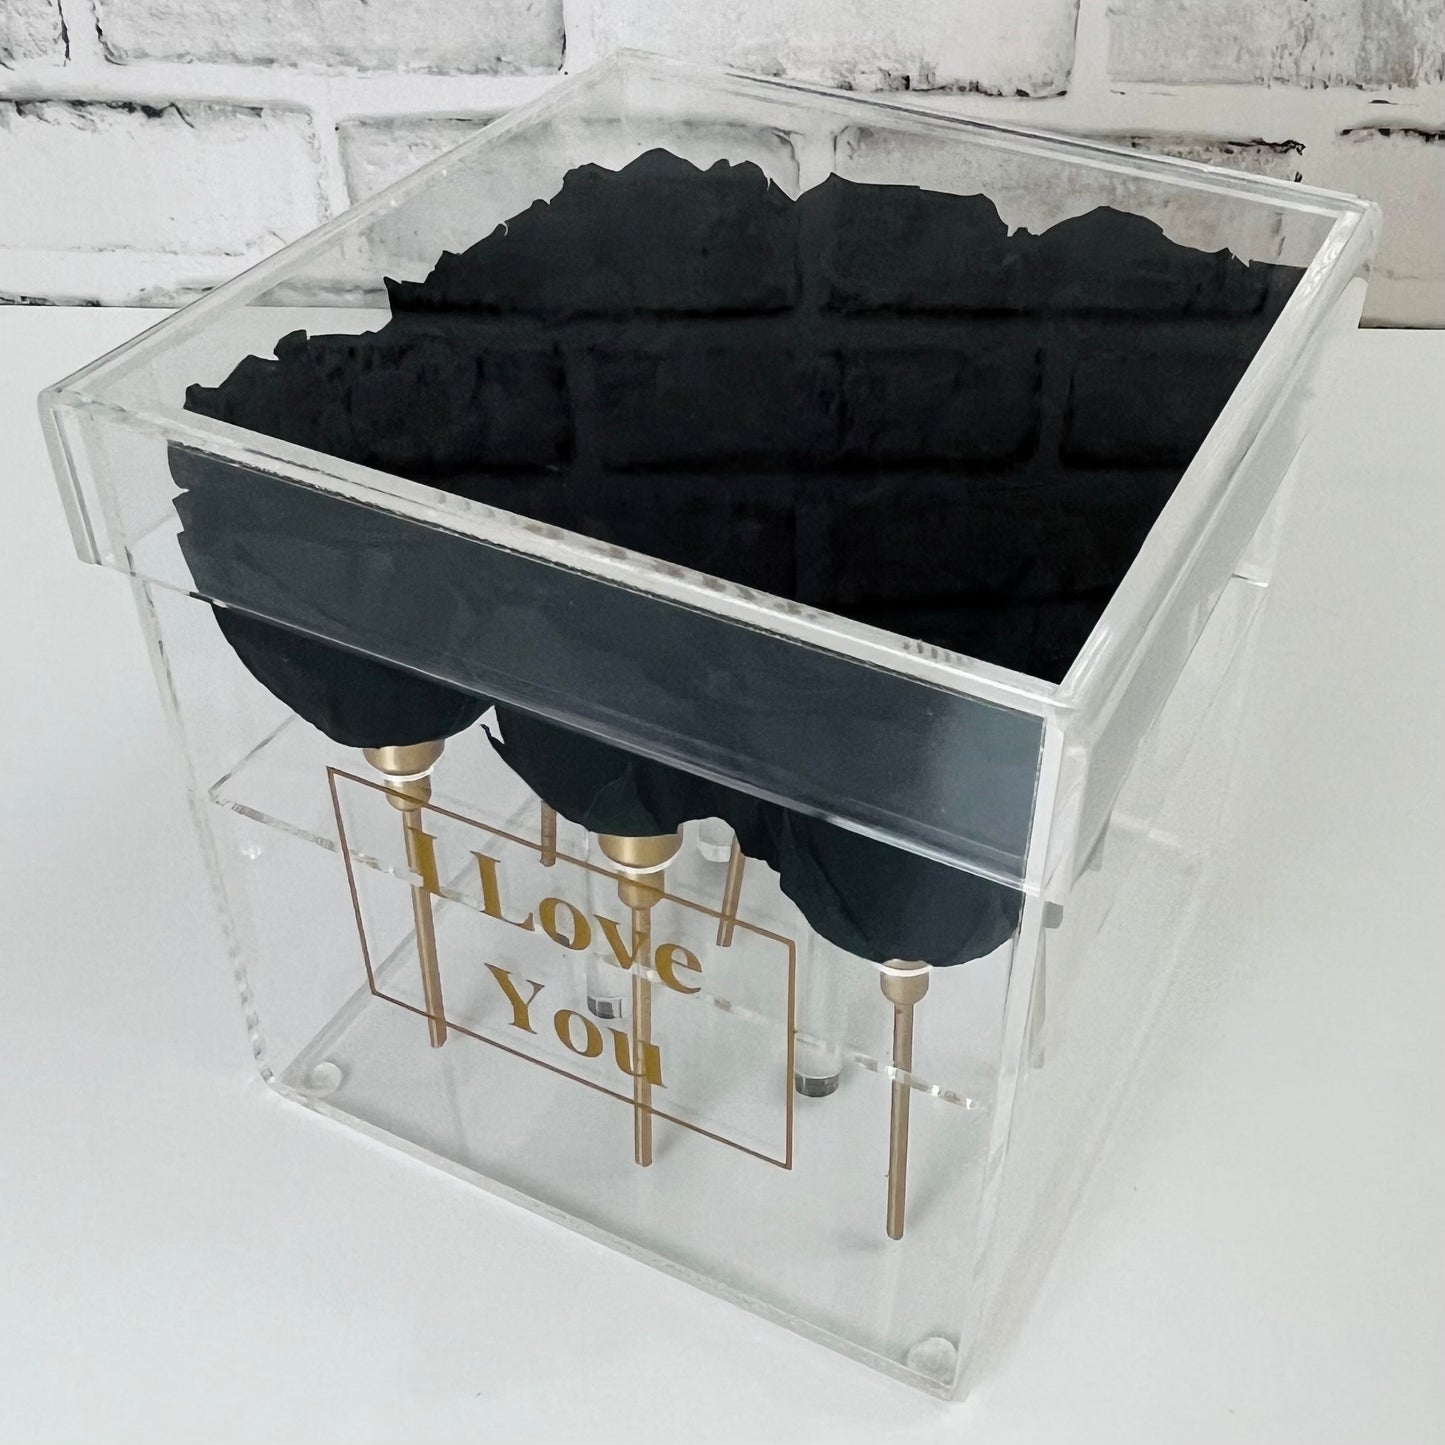 Infinity Rose Acrylic Box - Roses on Stems - Black Infinity Roses - Rose Colours divider-Midnight Black